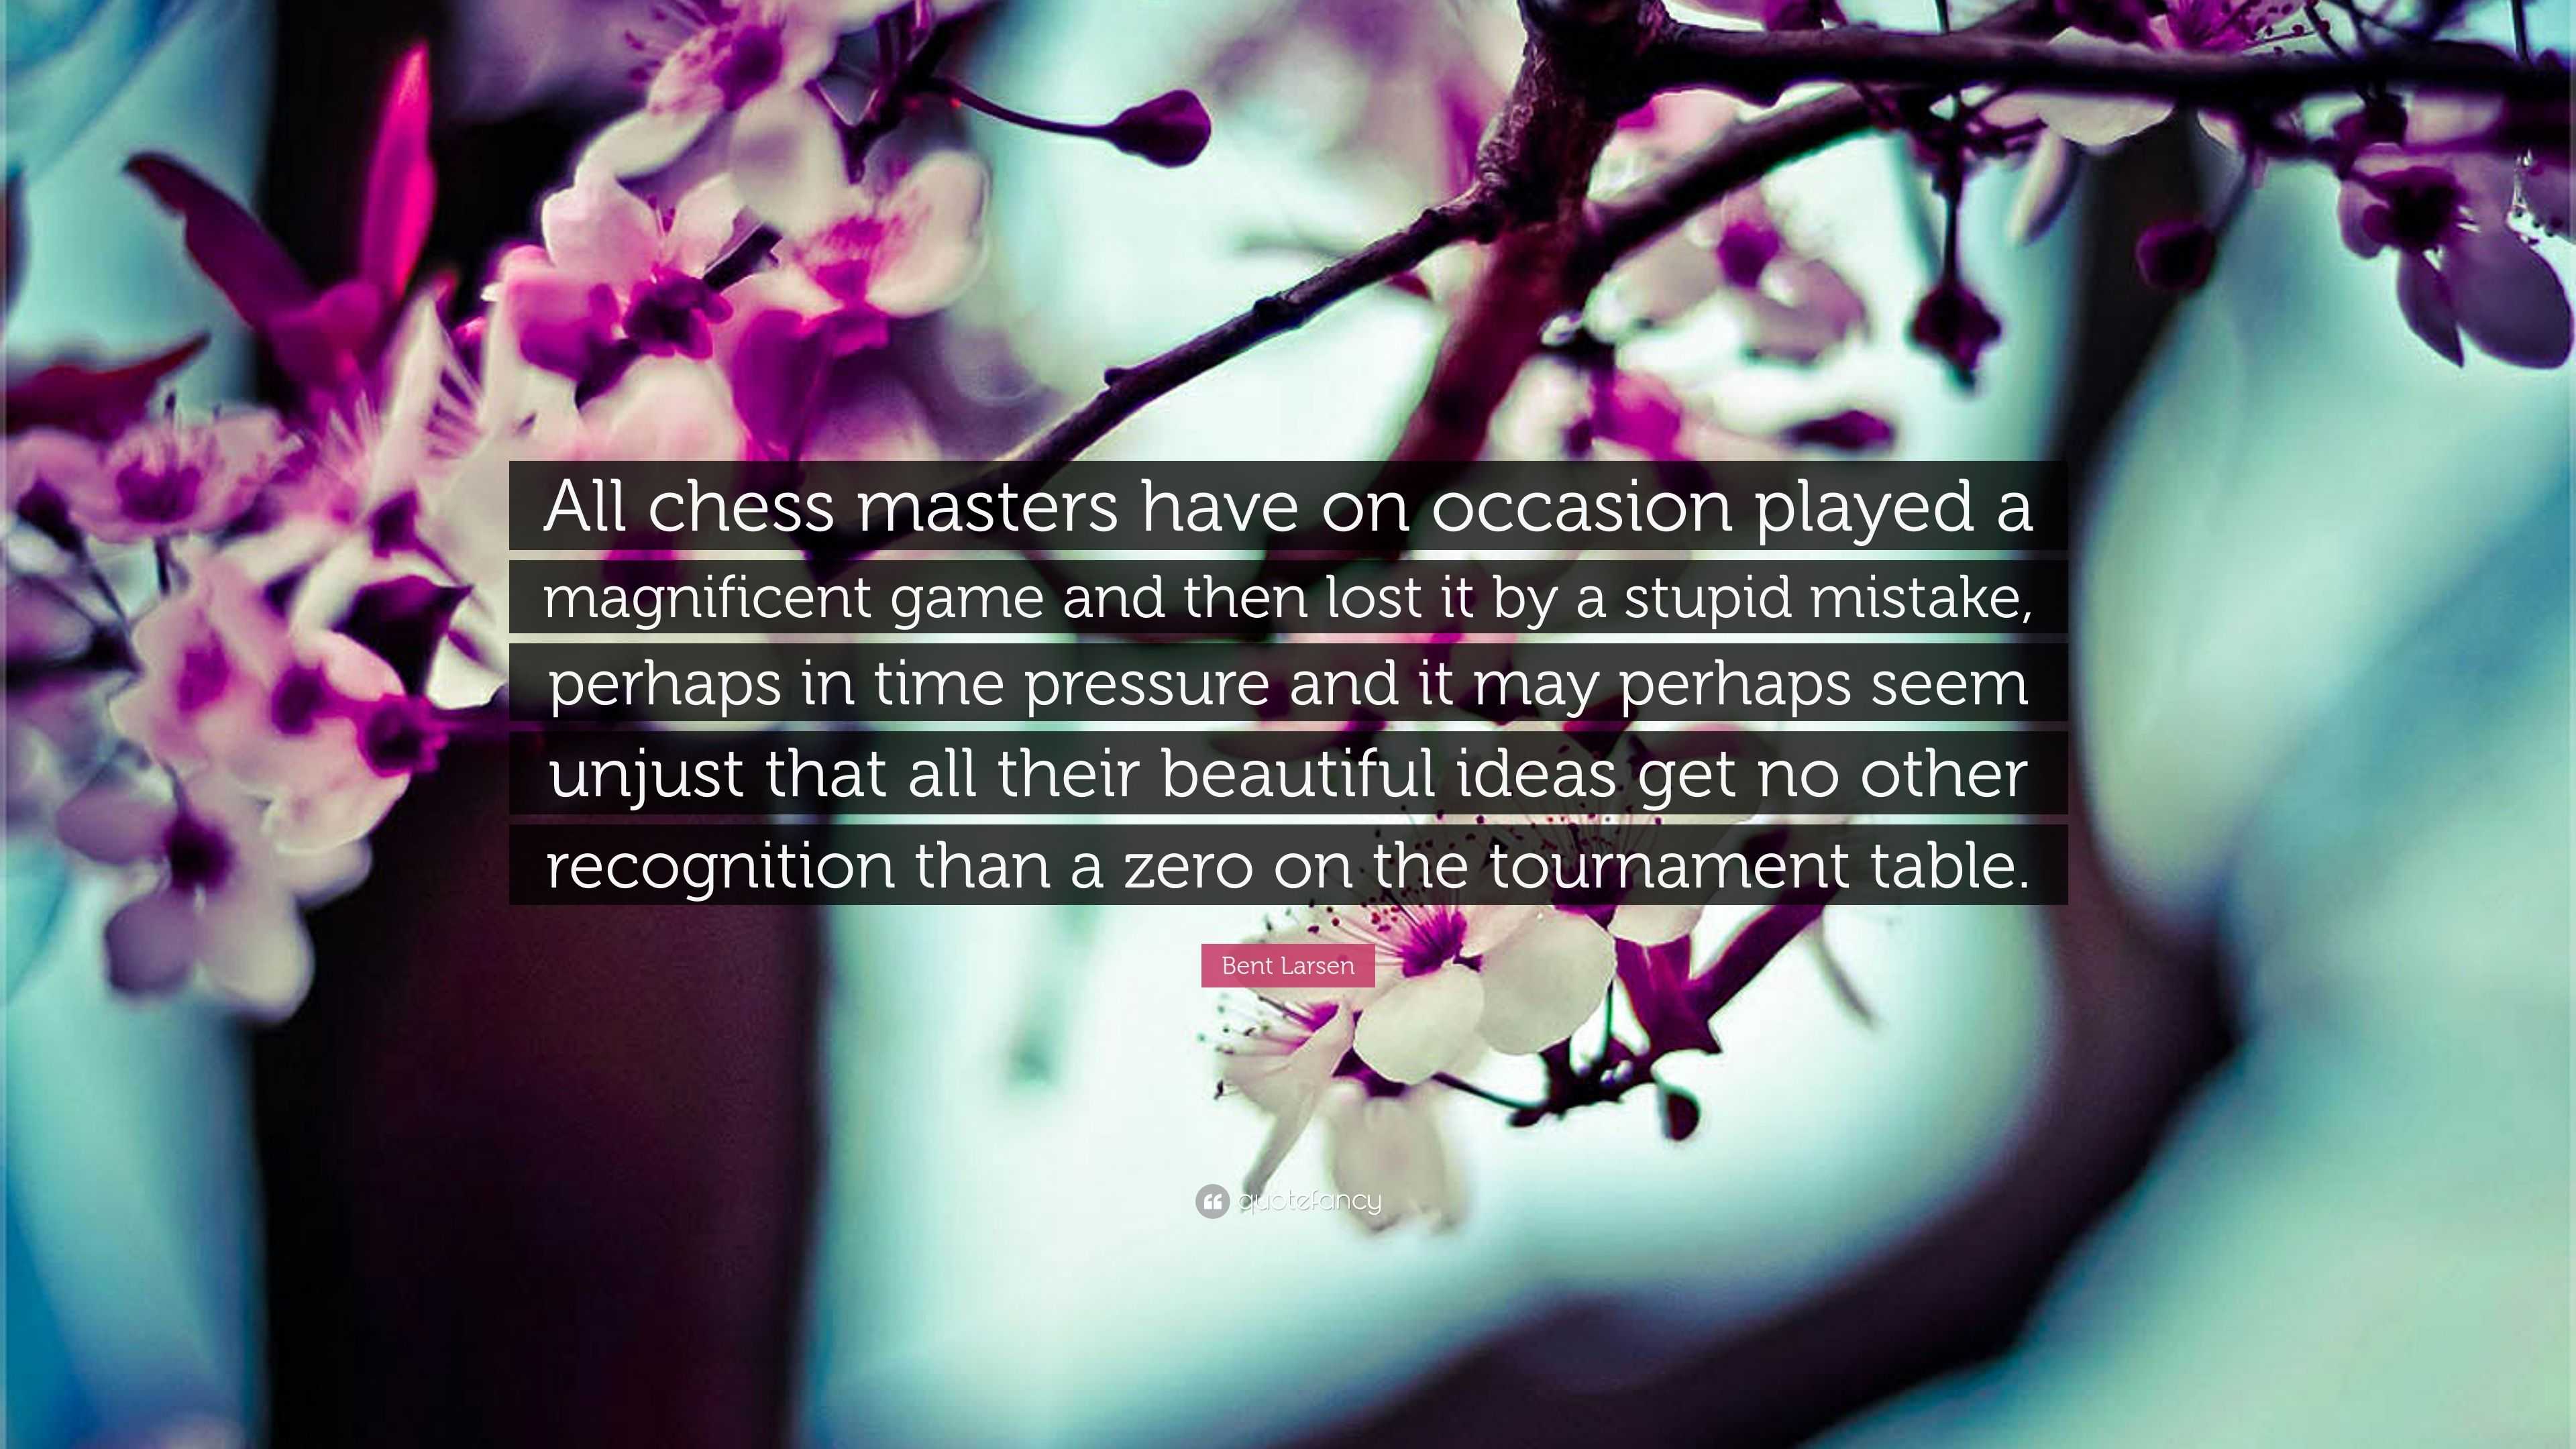 chess24 - There's definitely a tinge of regret when you watch a